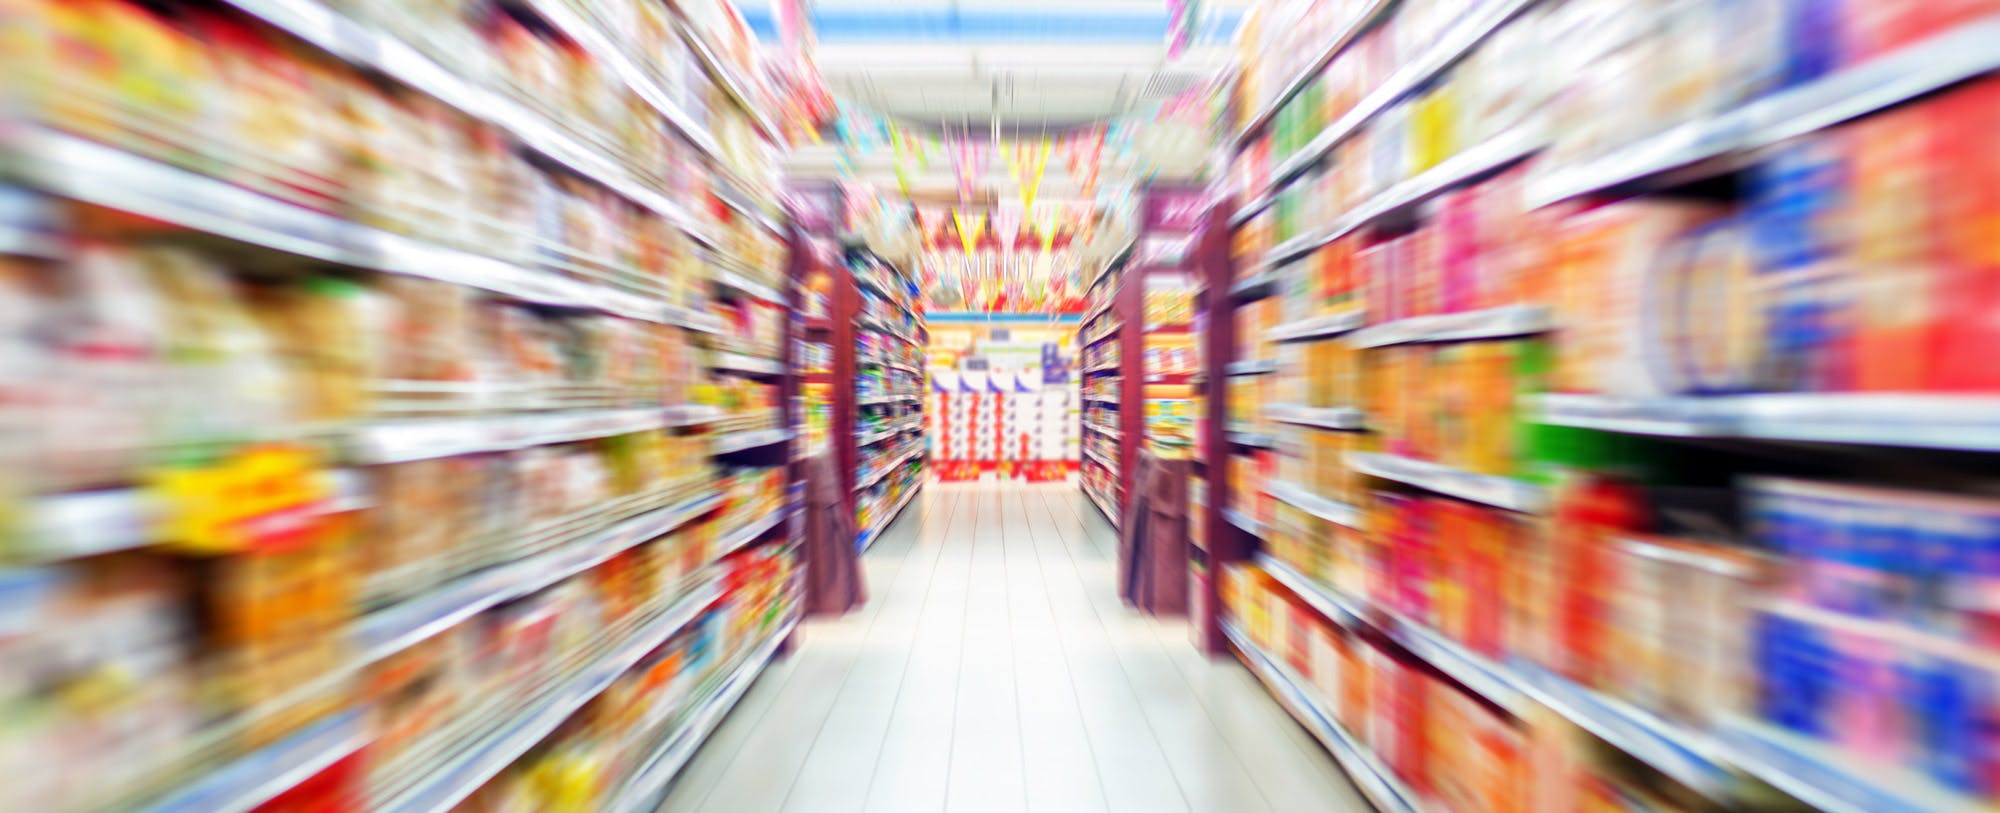 Nearly Naked:  Packaged Food Companies Strip Away Ingredients To Stay Relevant